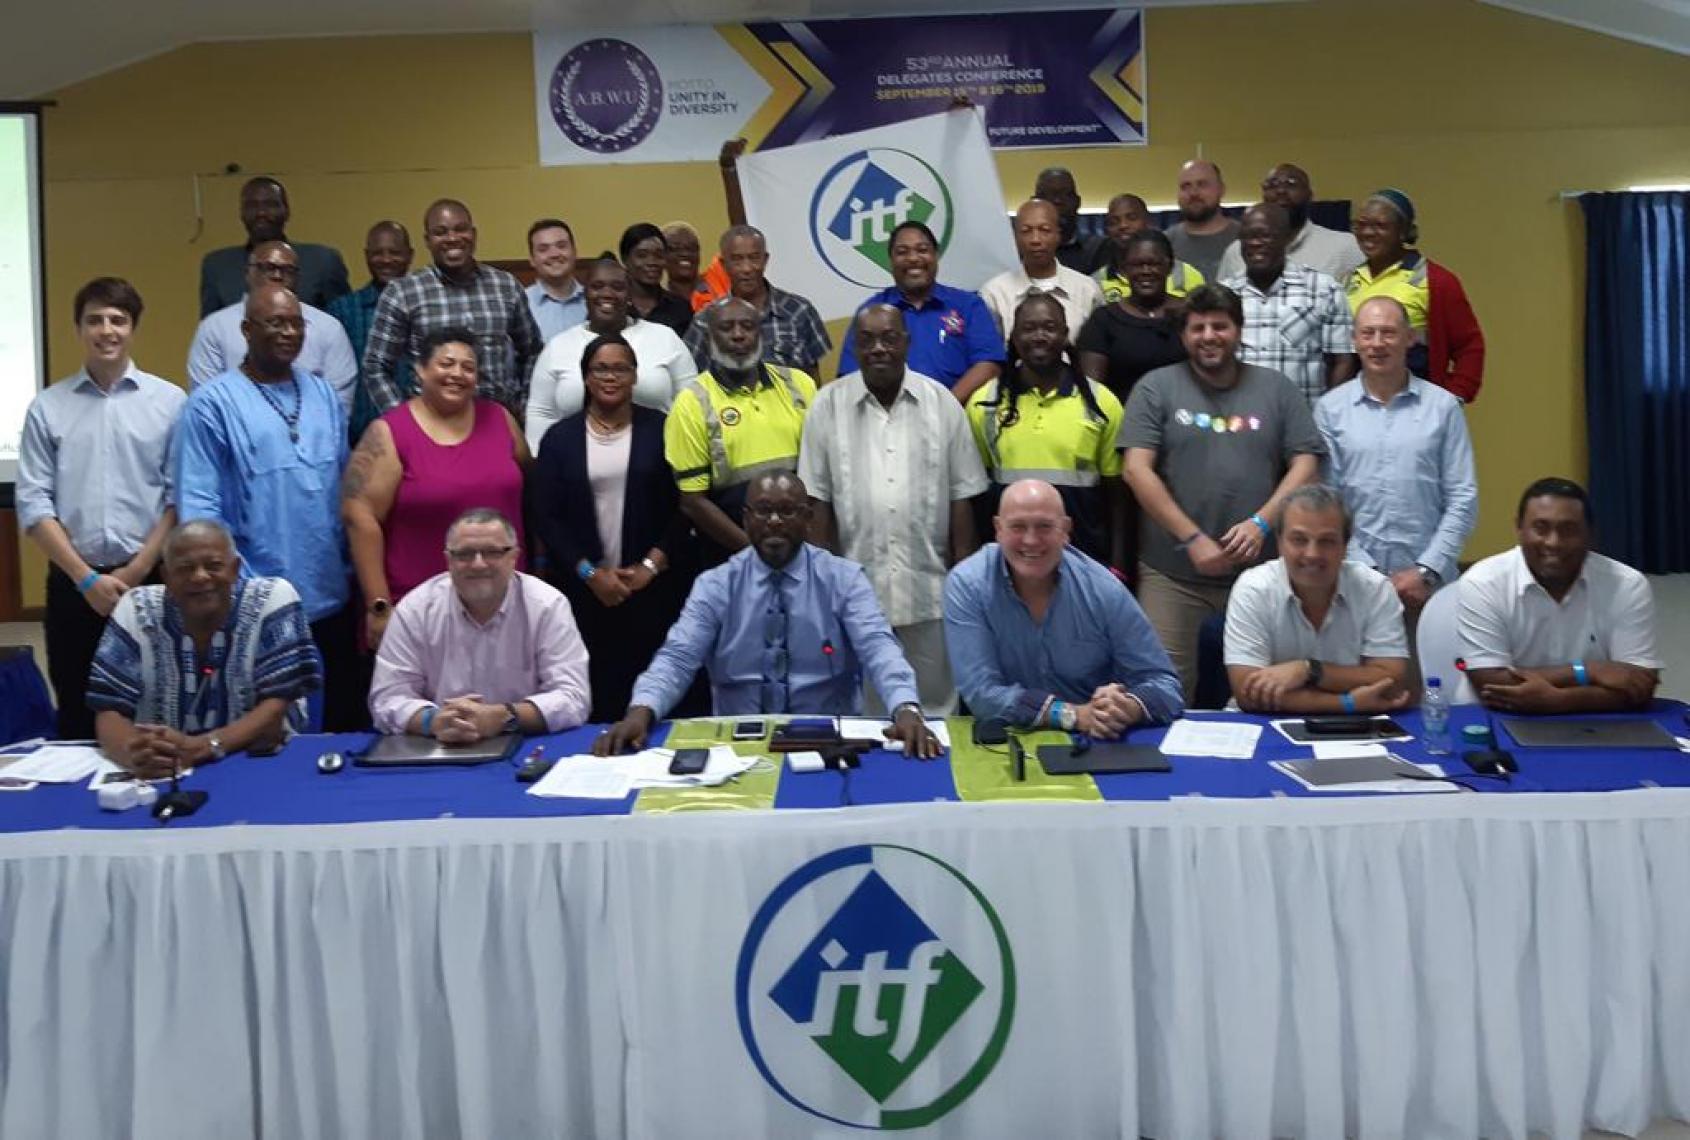 Caribbean region plans strategy to build workers' power | ITF Seafarers